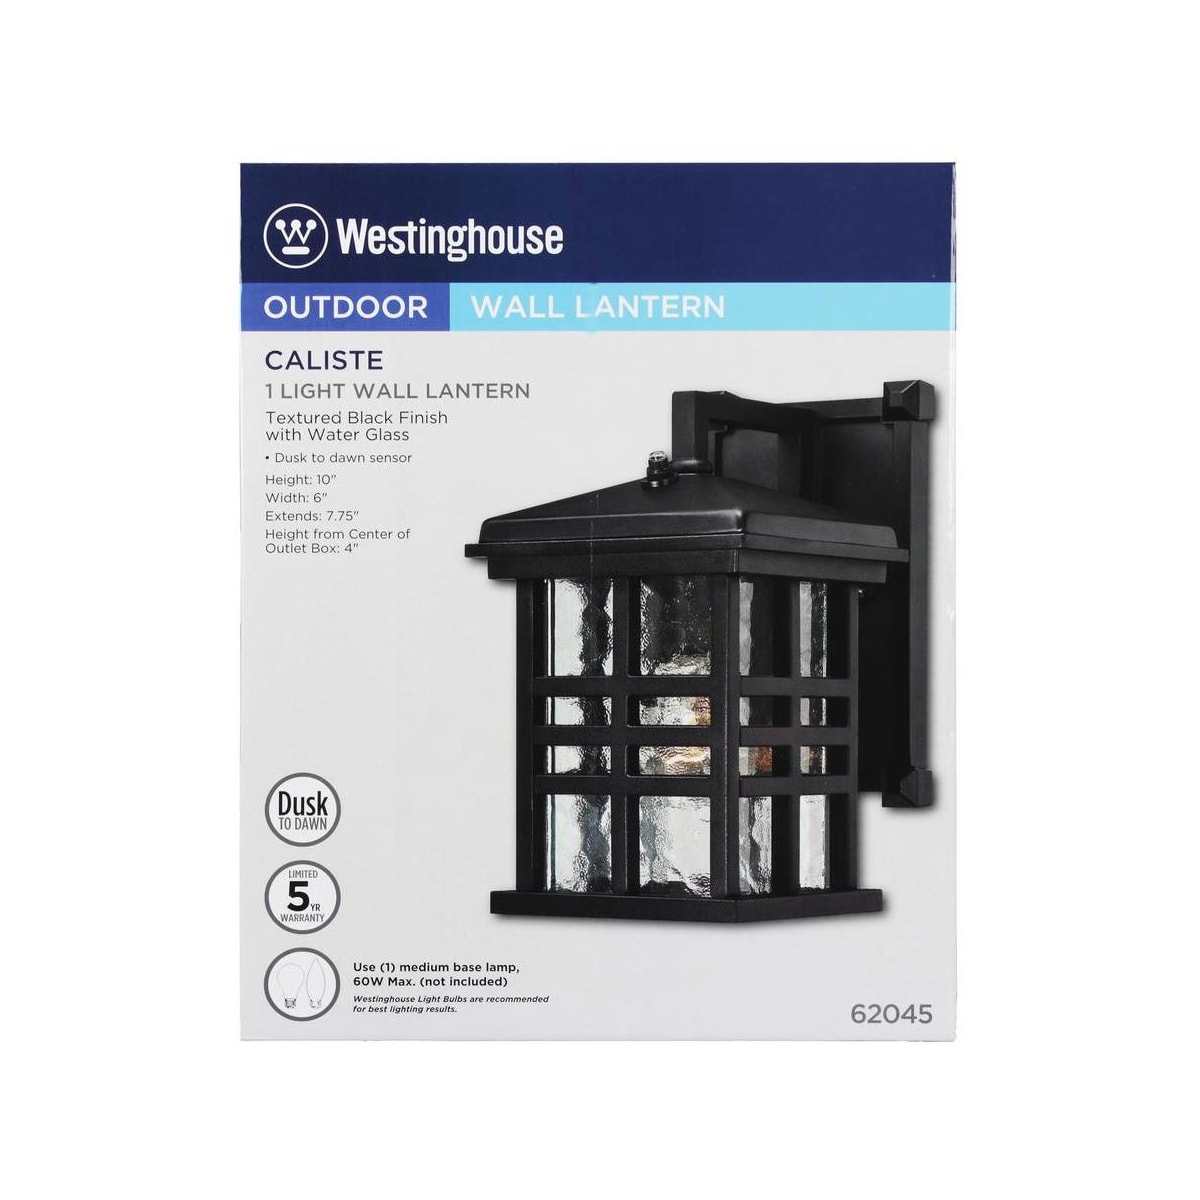 Westinghouse 6204500 Caliste 1 Light Outdoor Wall Lantern with Dusk to Dawn Sensor Textured Black 